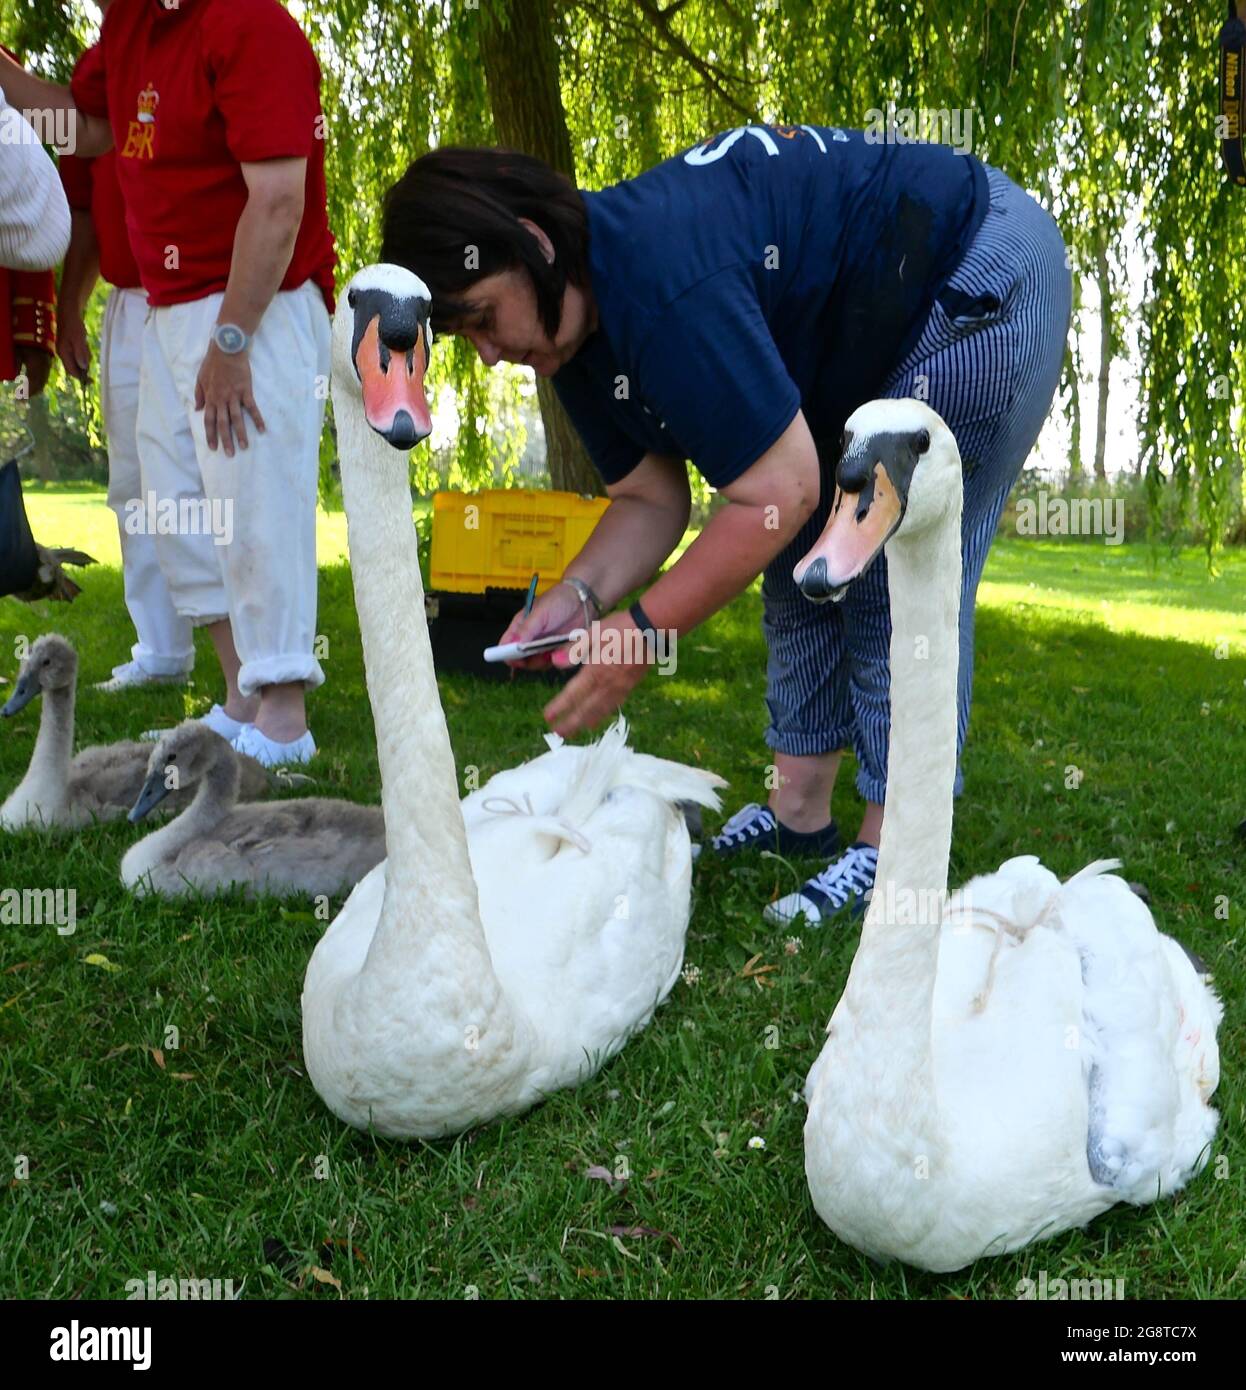 The Queen's Swan Marker, David Barber commented: “Members of the public  have been extremely observant during the Covid-19 lockdown and have  reported many injured swans. This has enabled them to be rescued